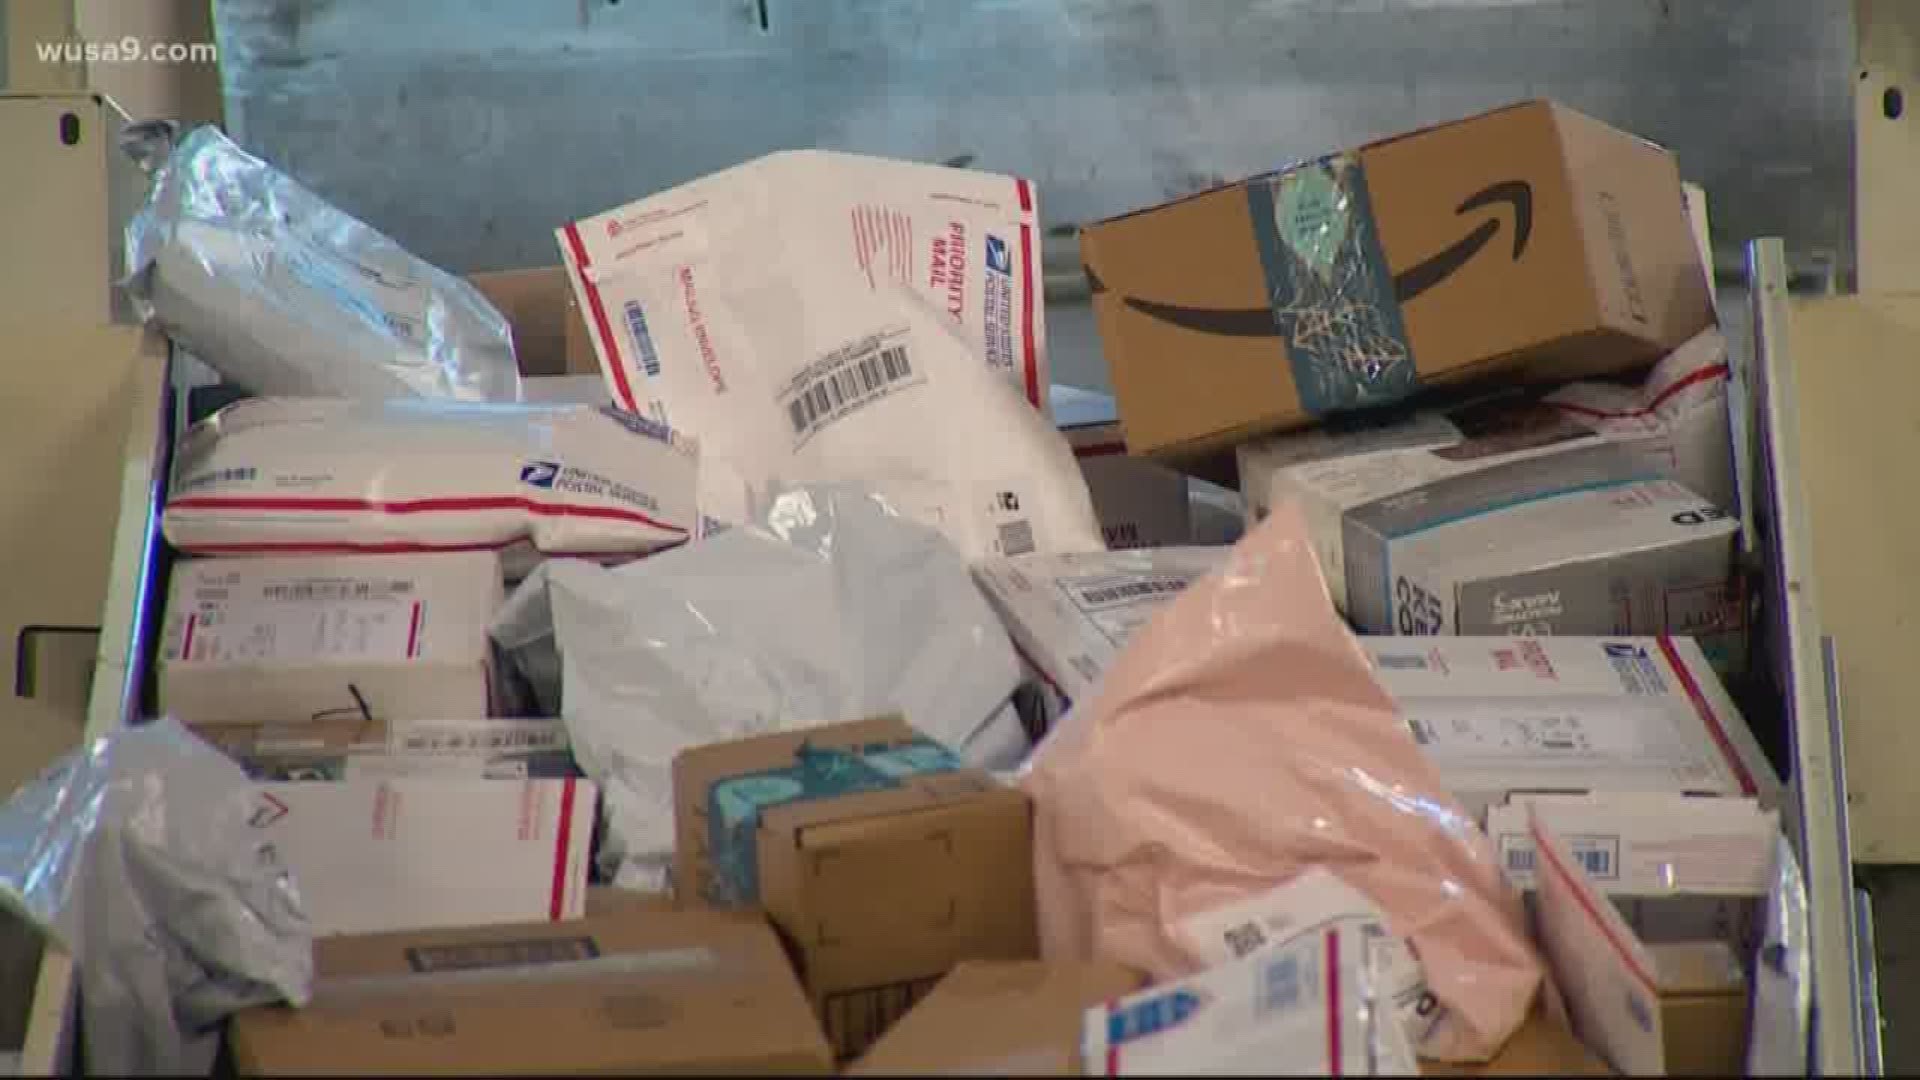 Northern Virginia Congressman Gerry Connolly says the coronavirus pandemic has hit the Postal Service hard. Claims USPS could run out of funds by June.